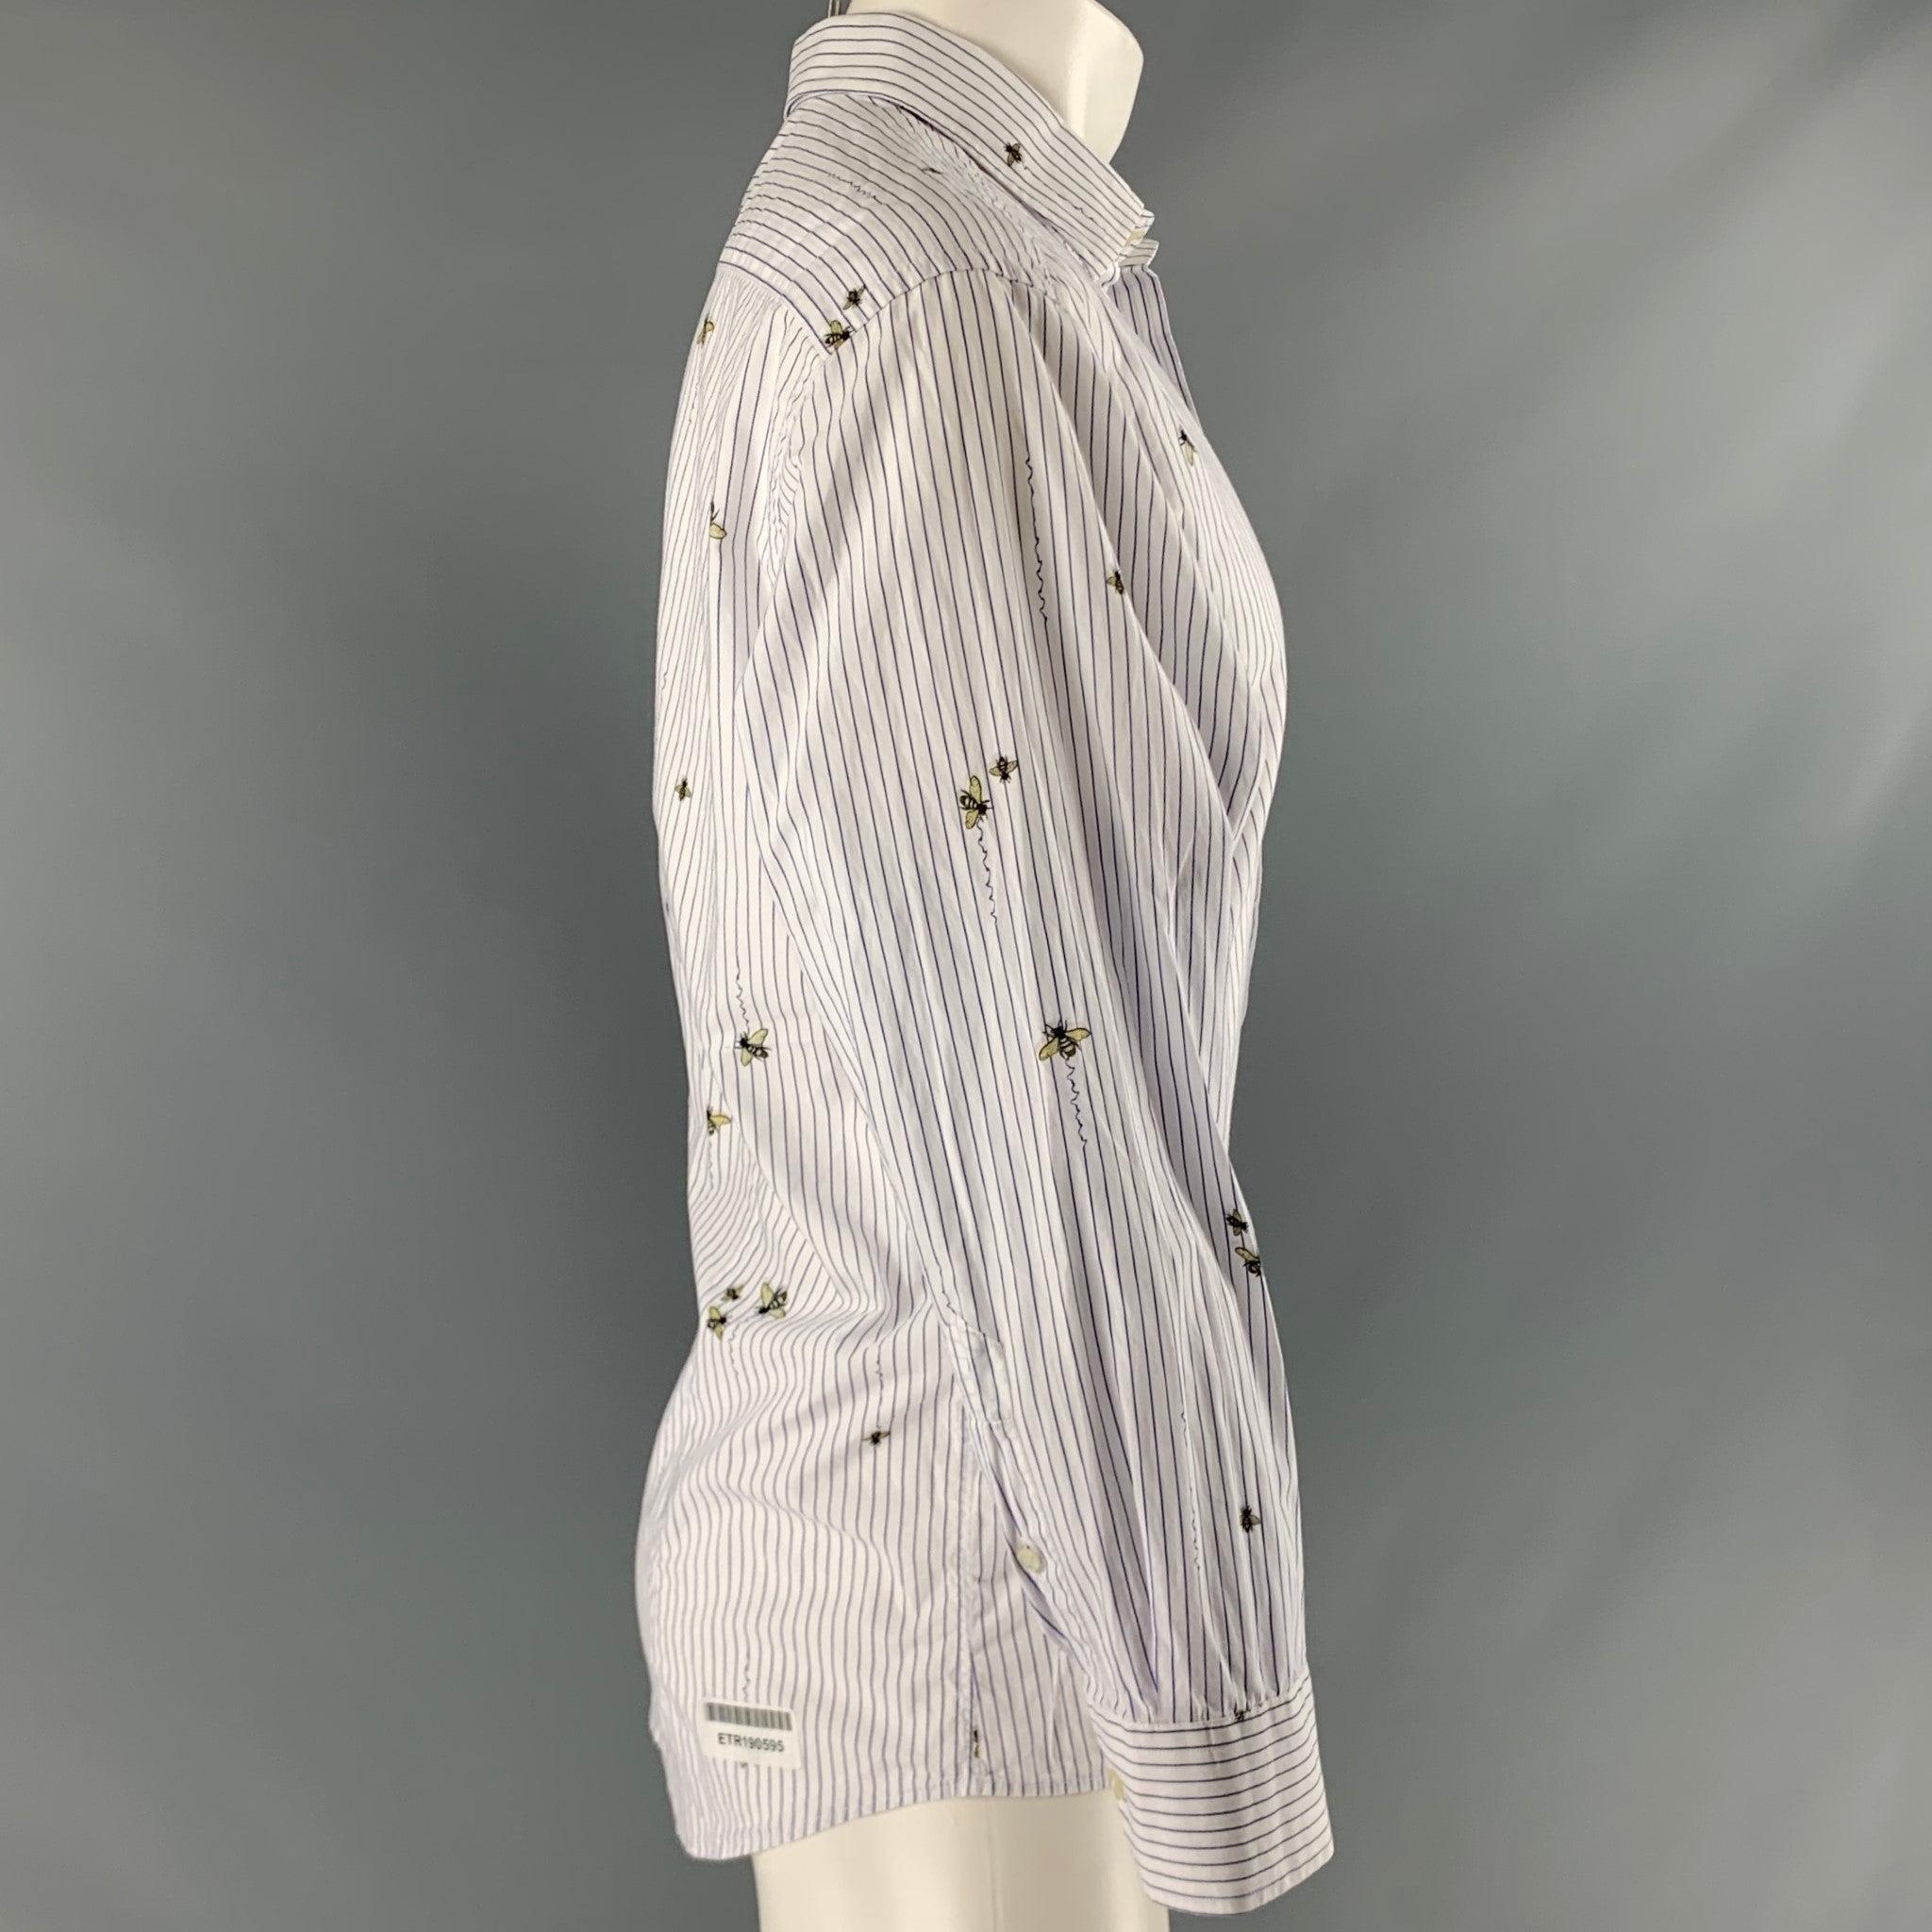 ETRO long sleeve shirt
in a white cotton fabric featuring thin vertical purple stripes and insect print, spread collar, and button closure. Made in Italy.Excellent Pre-Owned Condition. 

Marked:   43 

Measurements: 
 
Shoulder: 18 inches Chest: 47